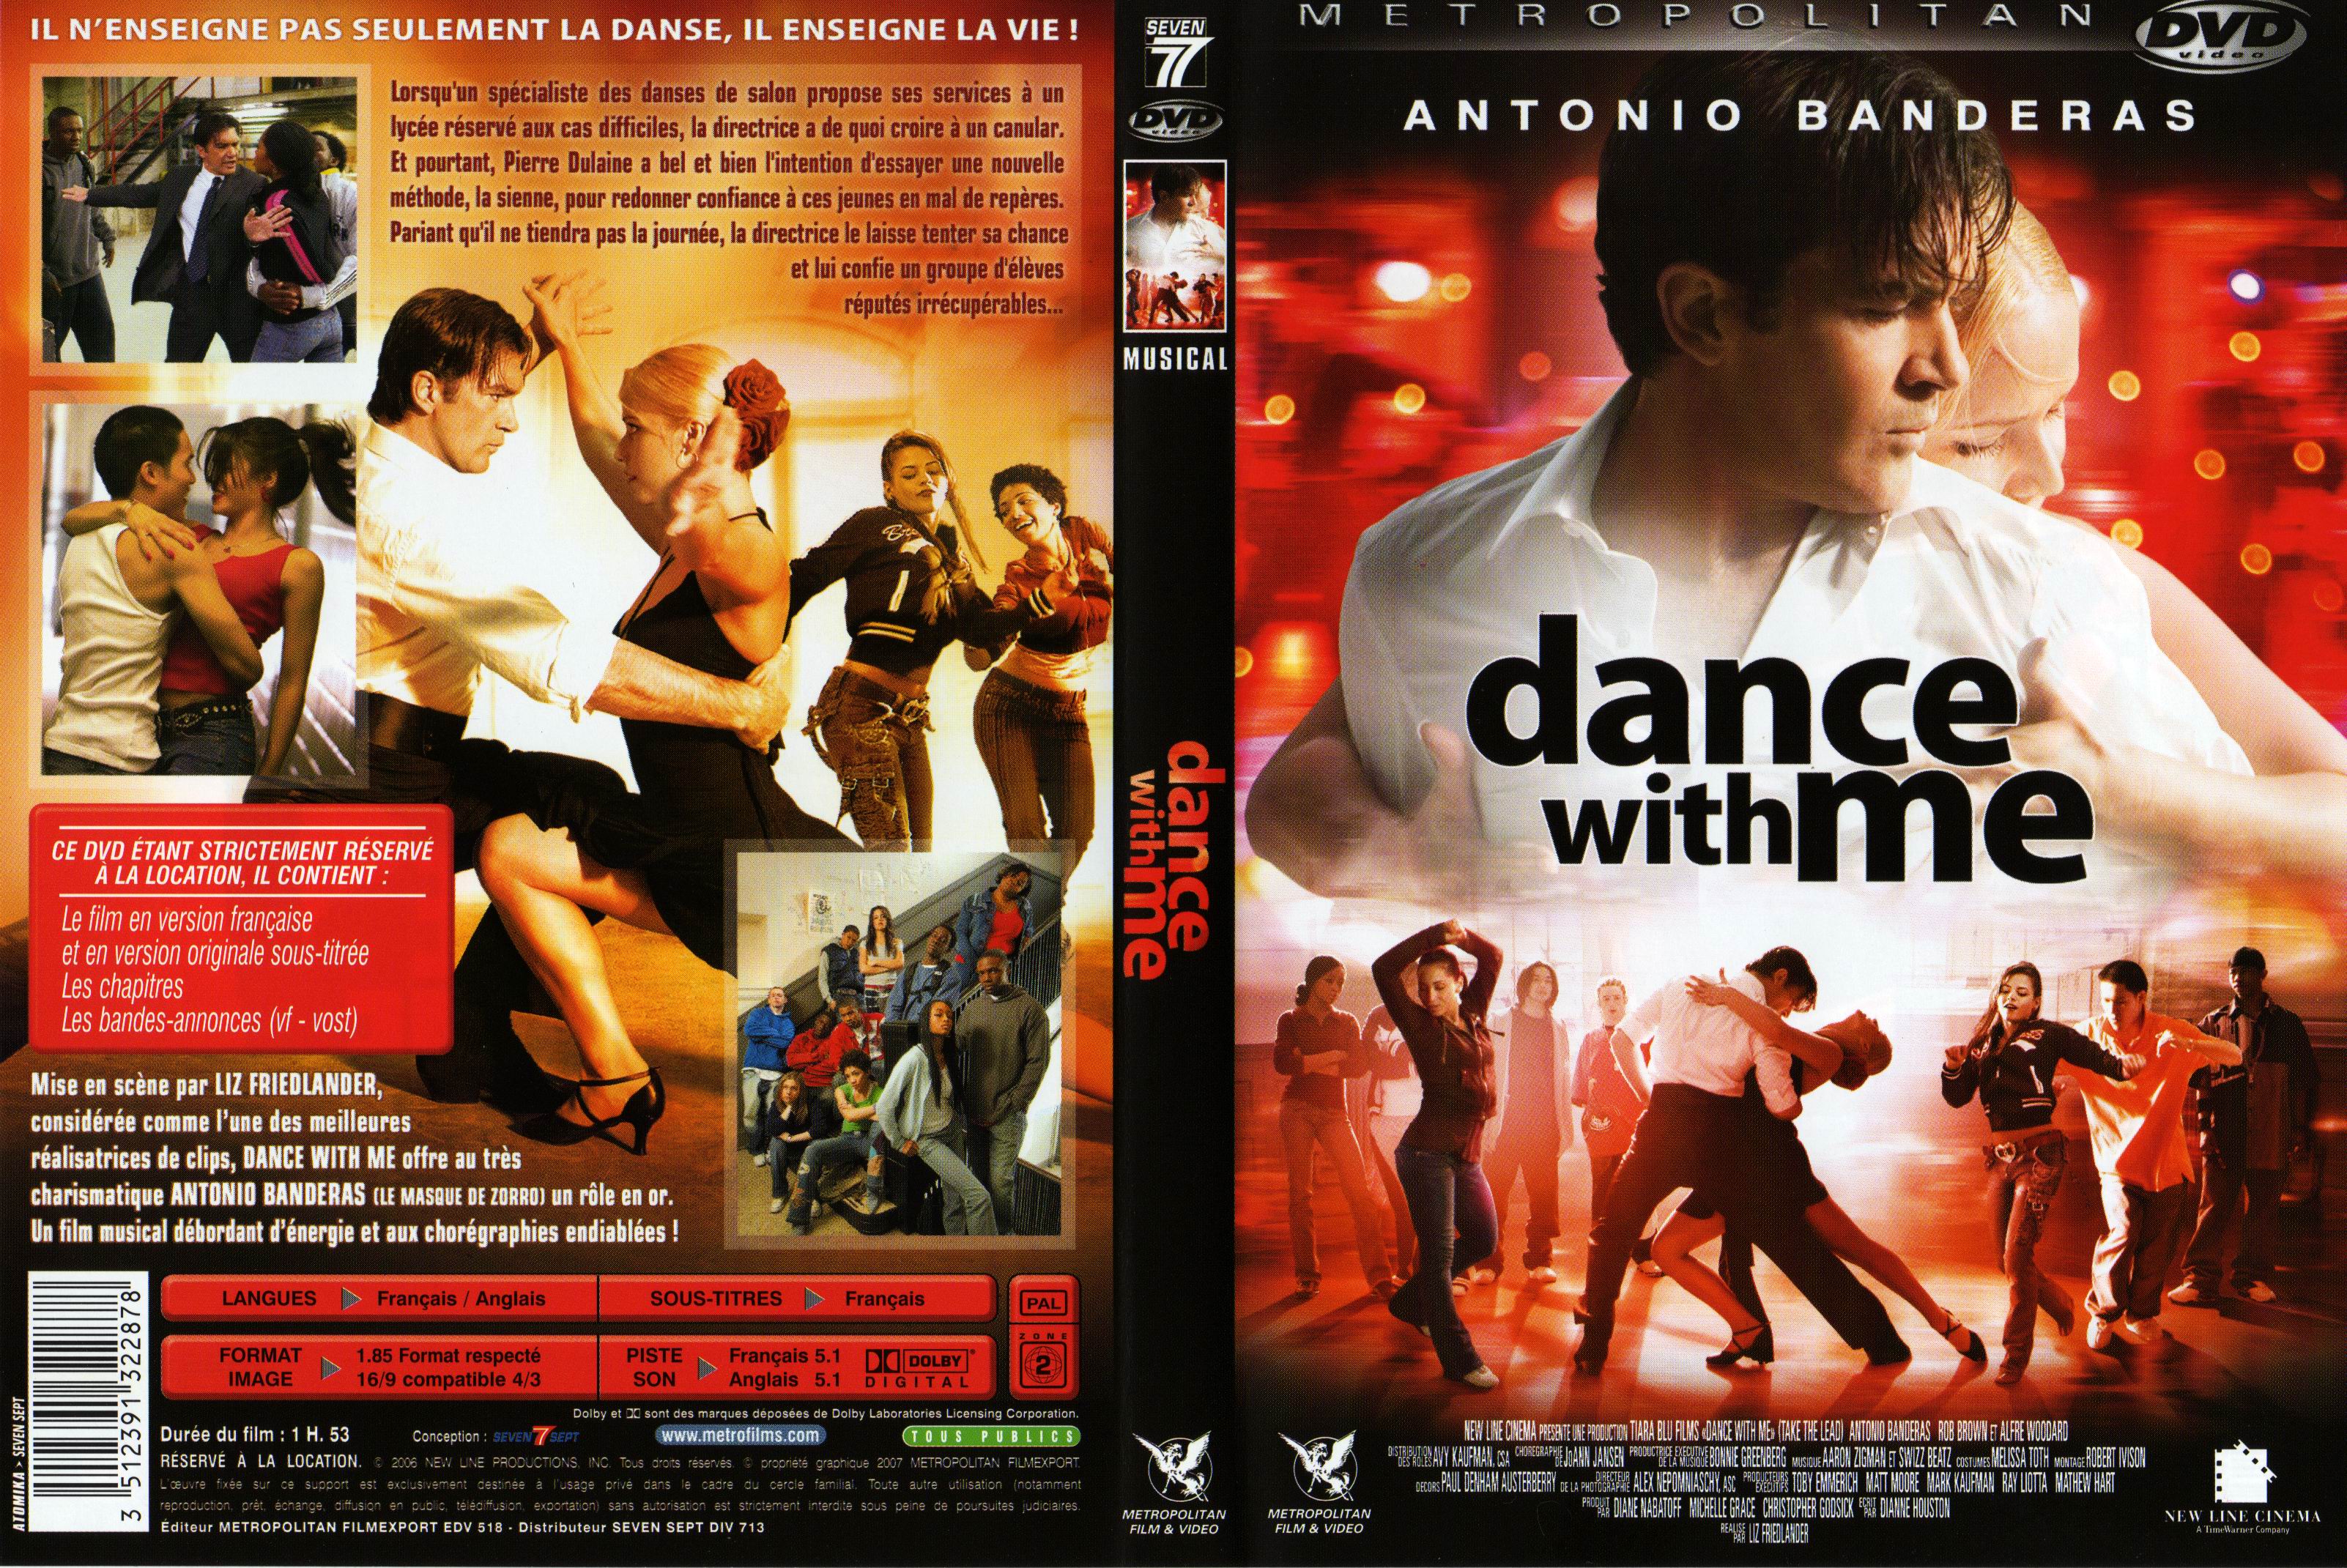 Jaquette DVD Dance with me